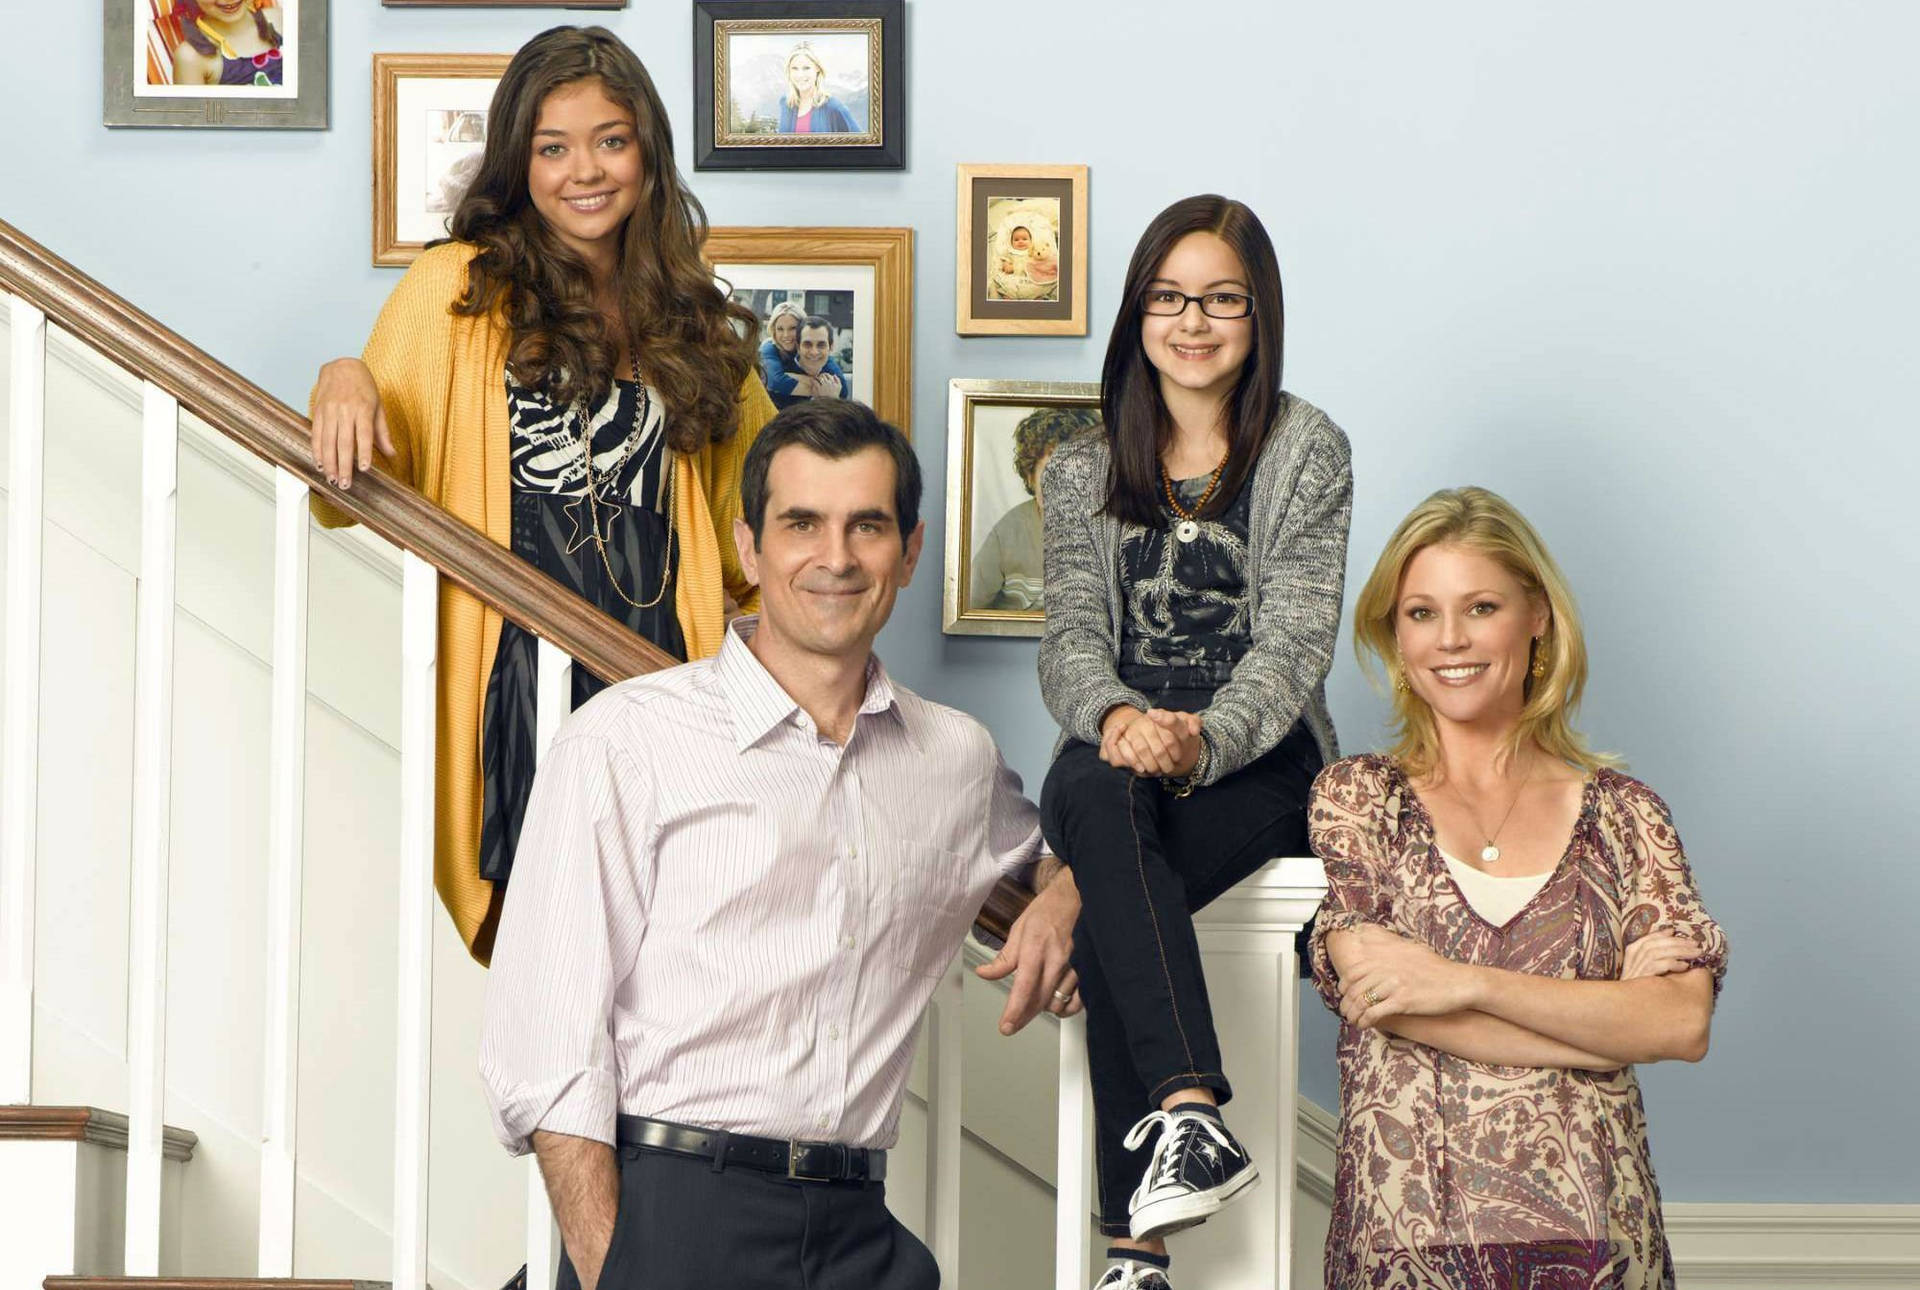 The Dunphy Family - The Wacky, Lovable Domestic Unit At The Center Of Modern Family.